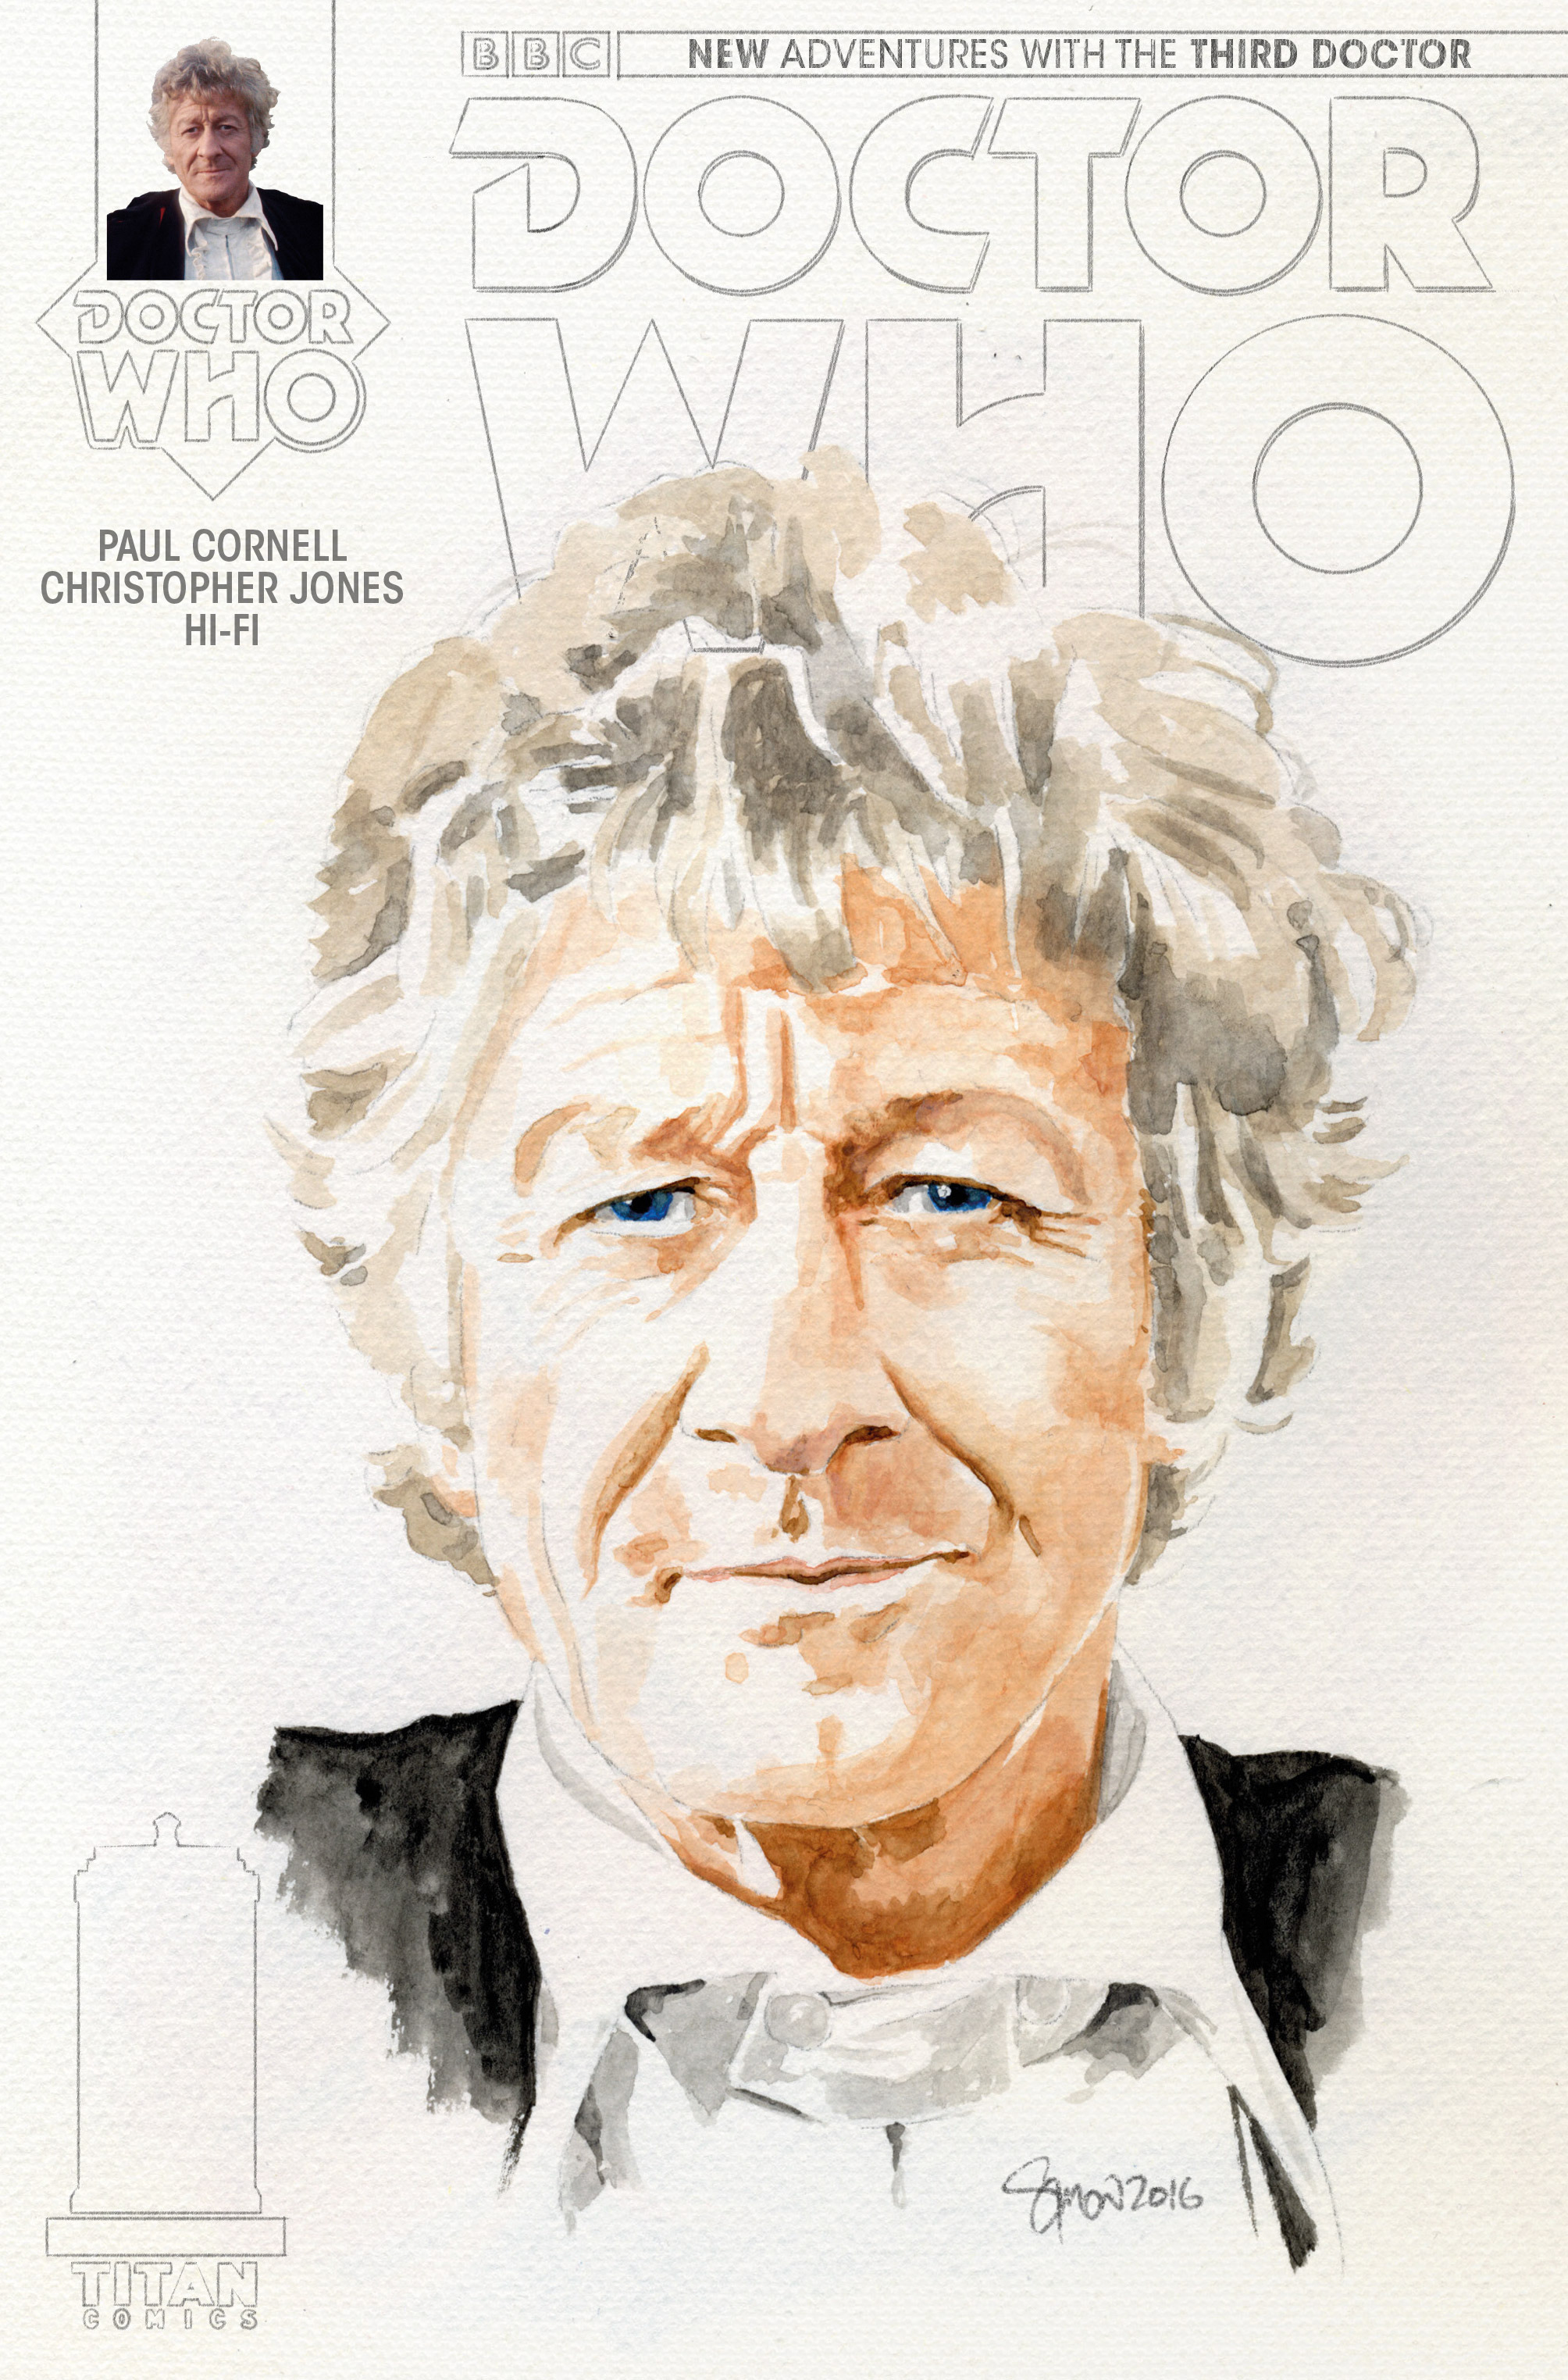 Read online Doctor Who: The Third Doctor comic -  Issue #1 - 3